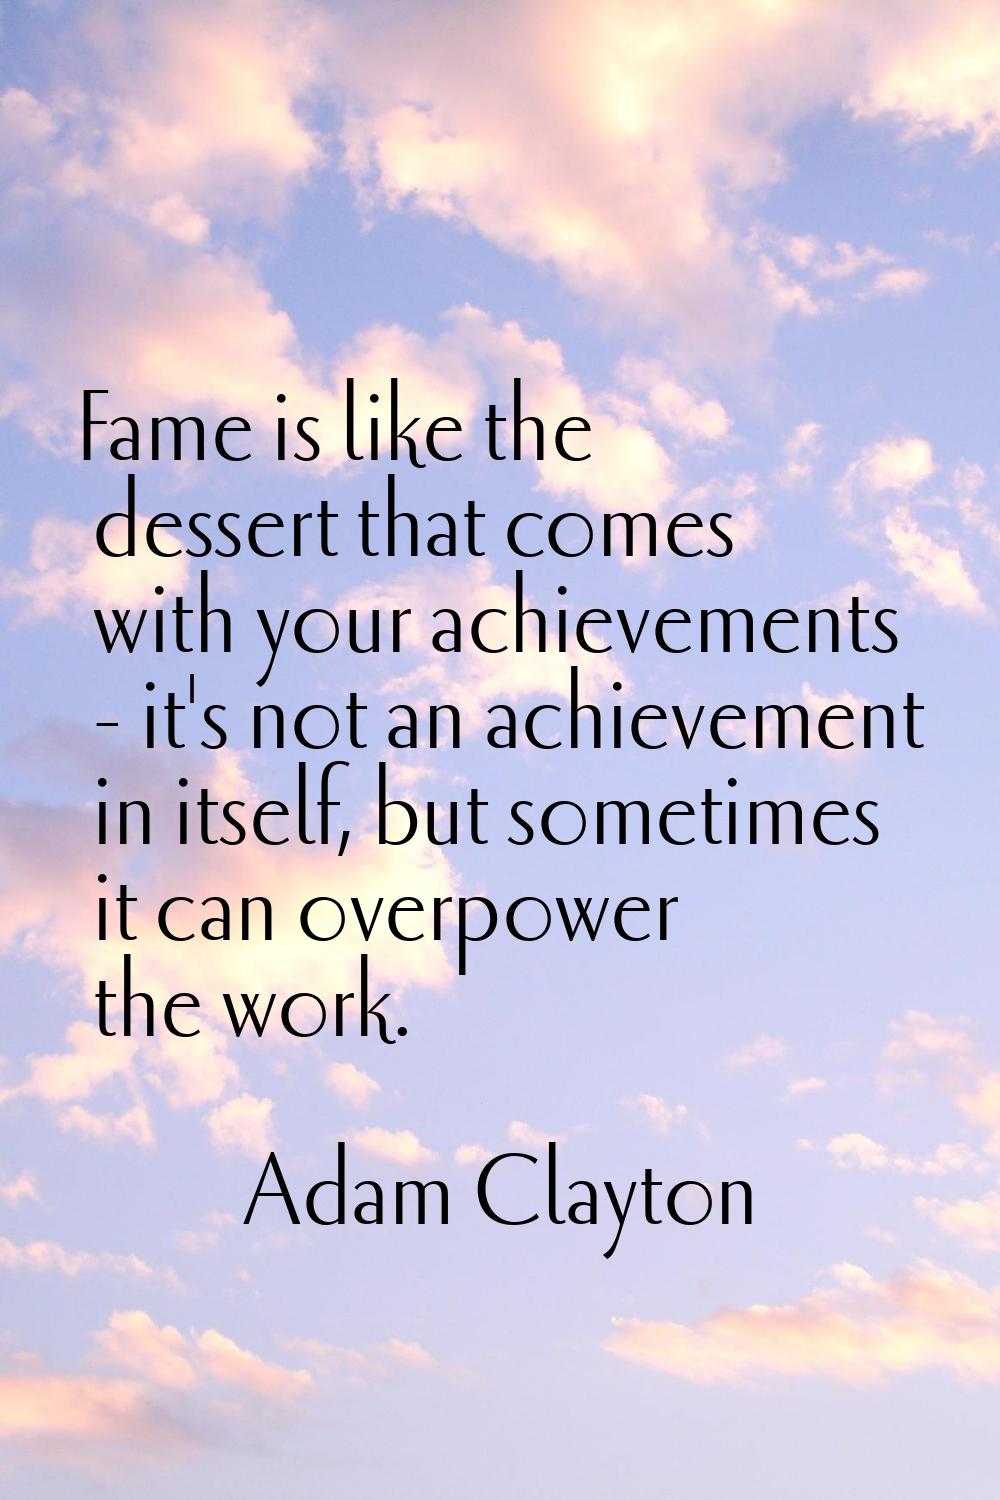 Fame is like the dessert that comes with your achievements - it's not an achievement in itself, but